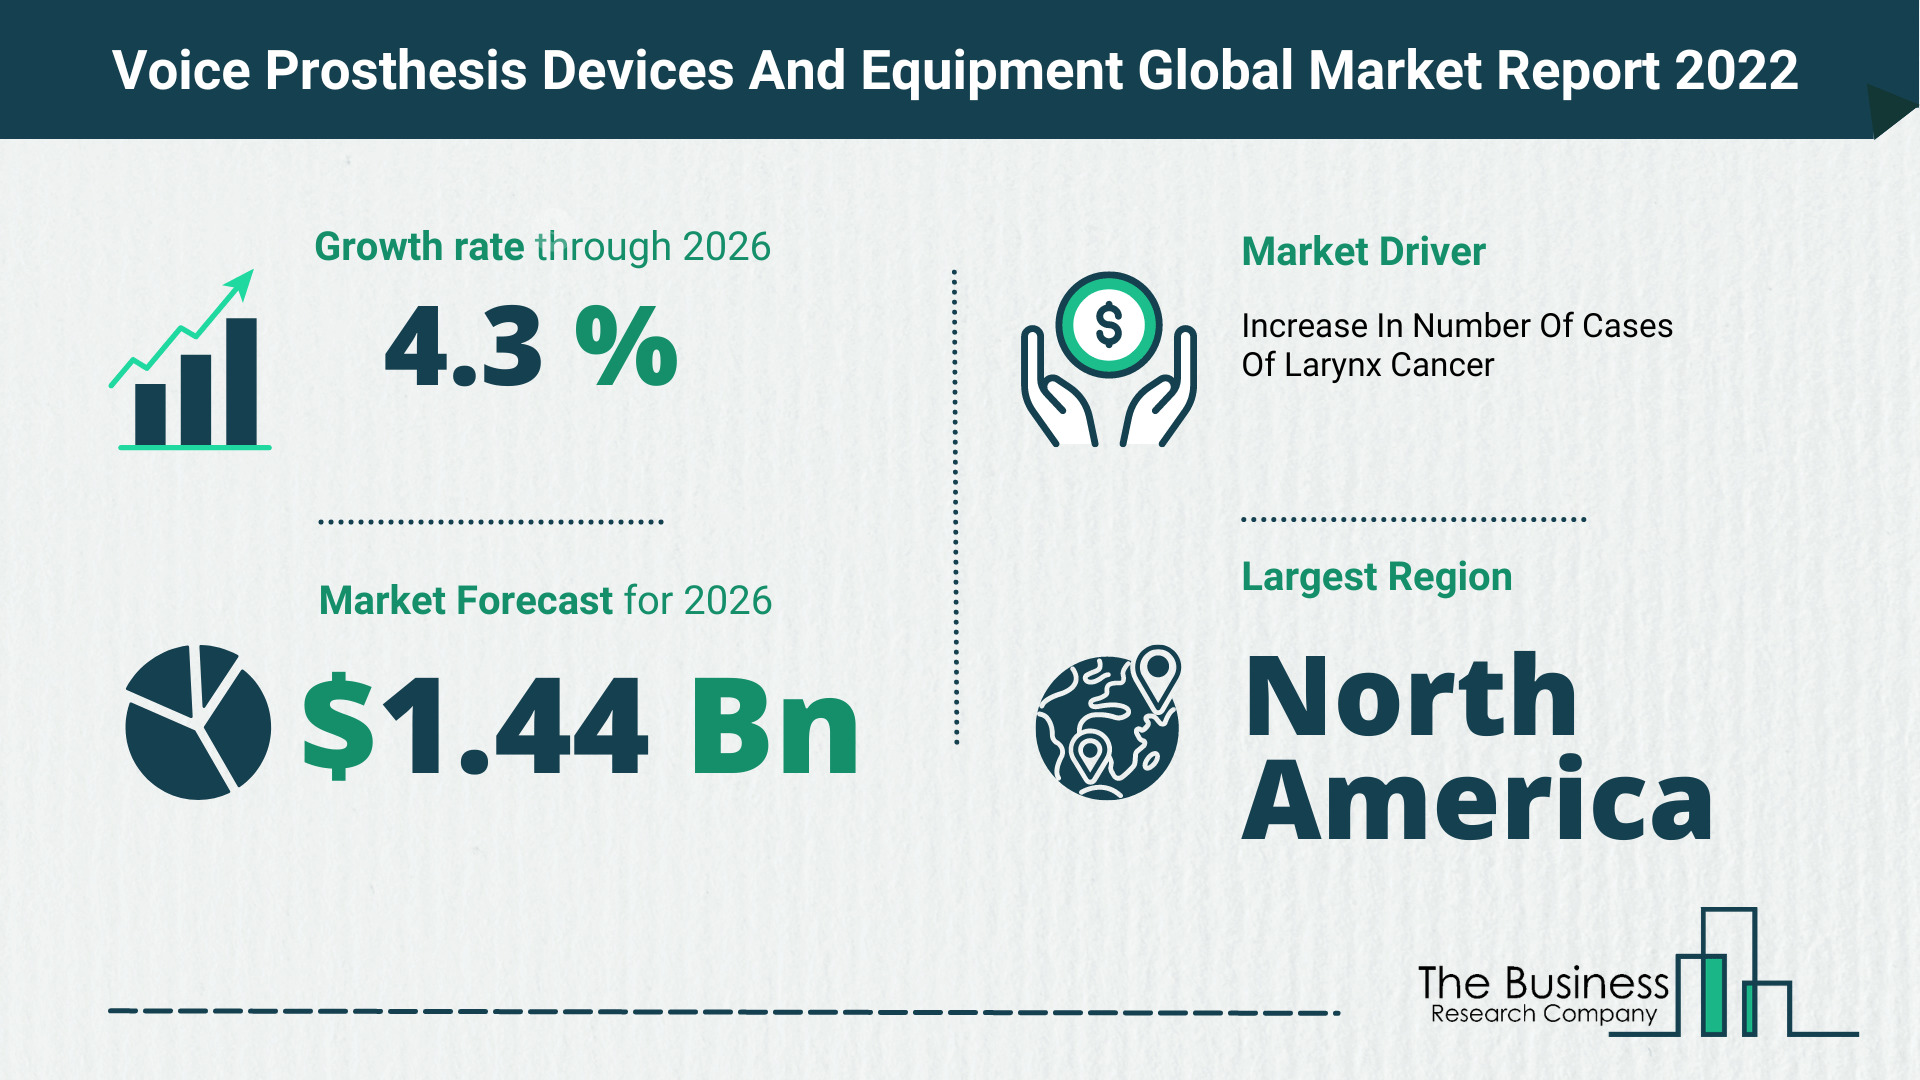 The Voice Prosthesis Devices And Equipment Market Share, Market Size, And Growth Rate 2022